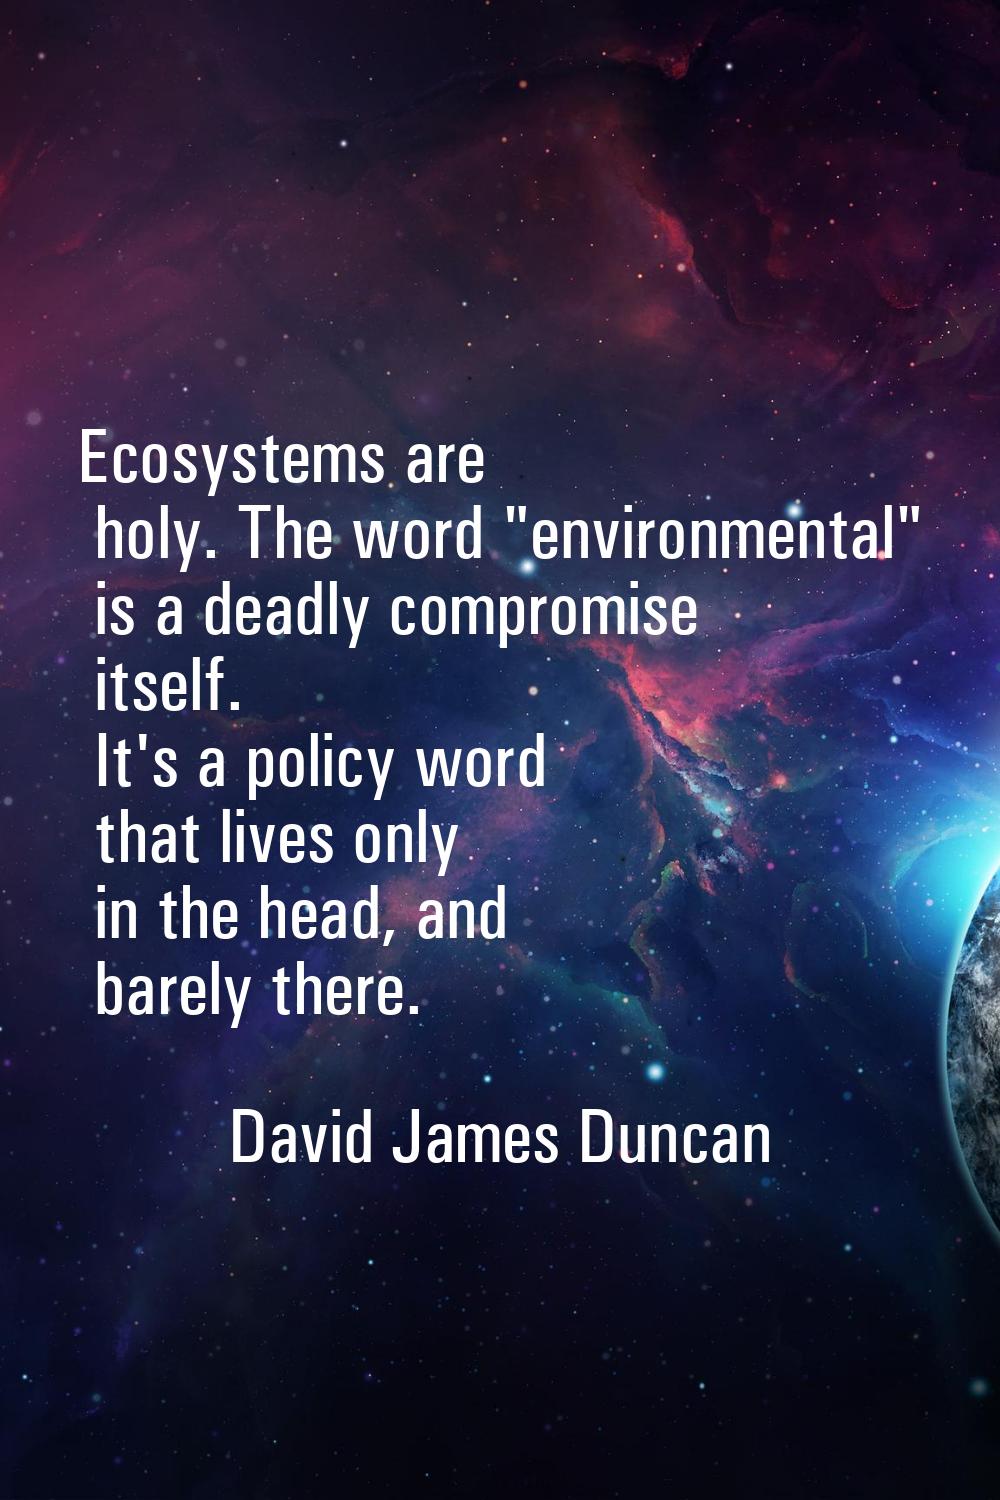 Ecosystems are holy. The word "environmental" is a deadly compromise itself. It's a policy word tha